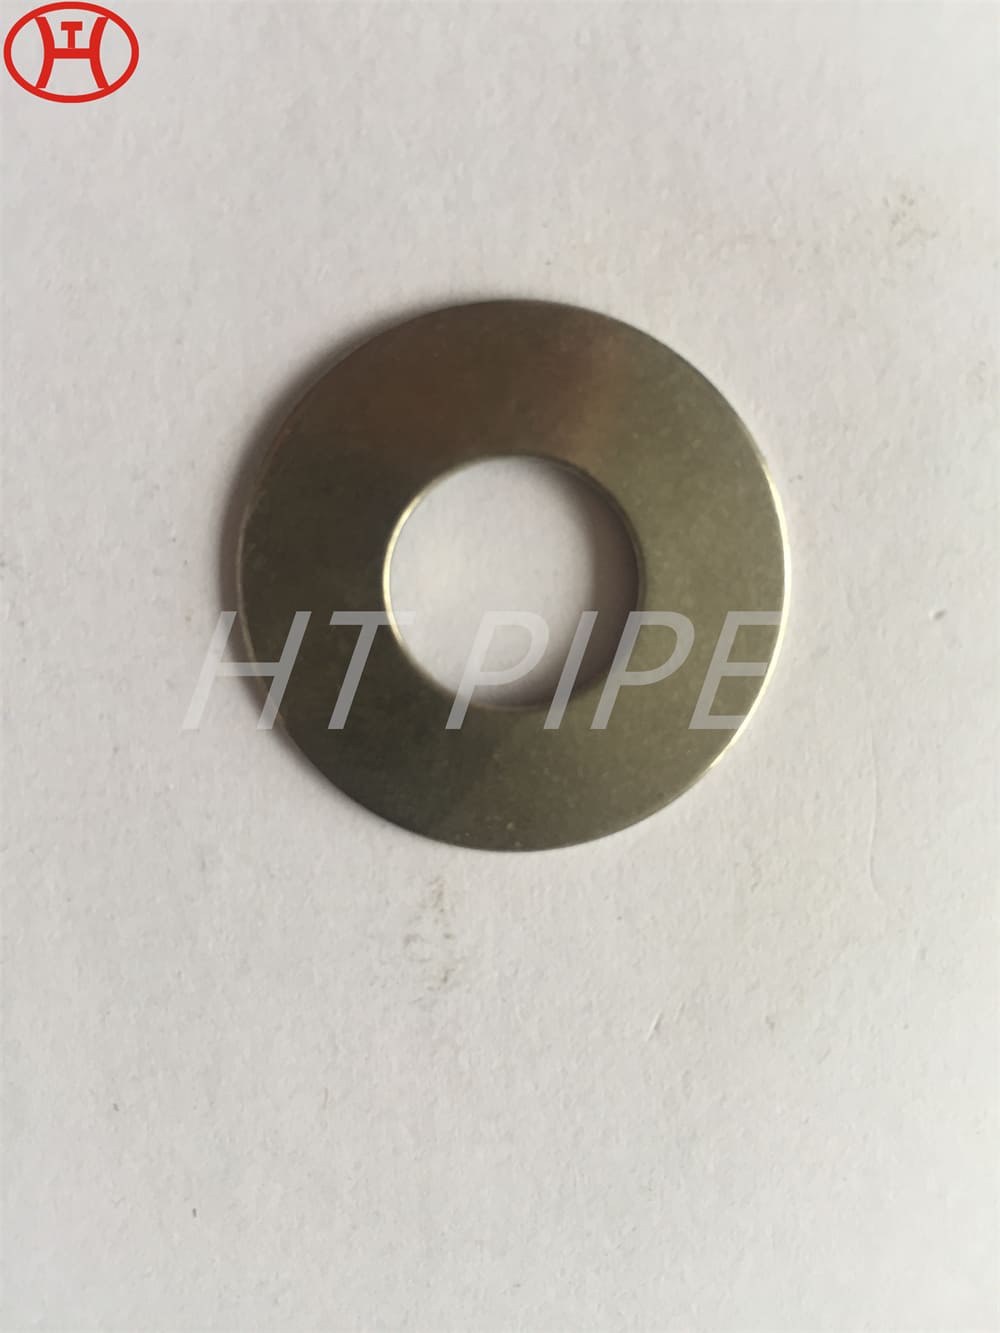 nickel alloy Hastelloy C22 half partial washer FACTORY MADE DIN125 Plain Washer